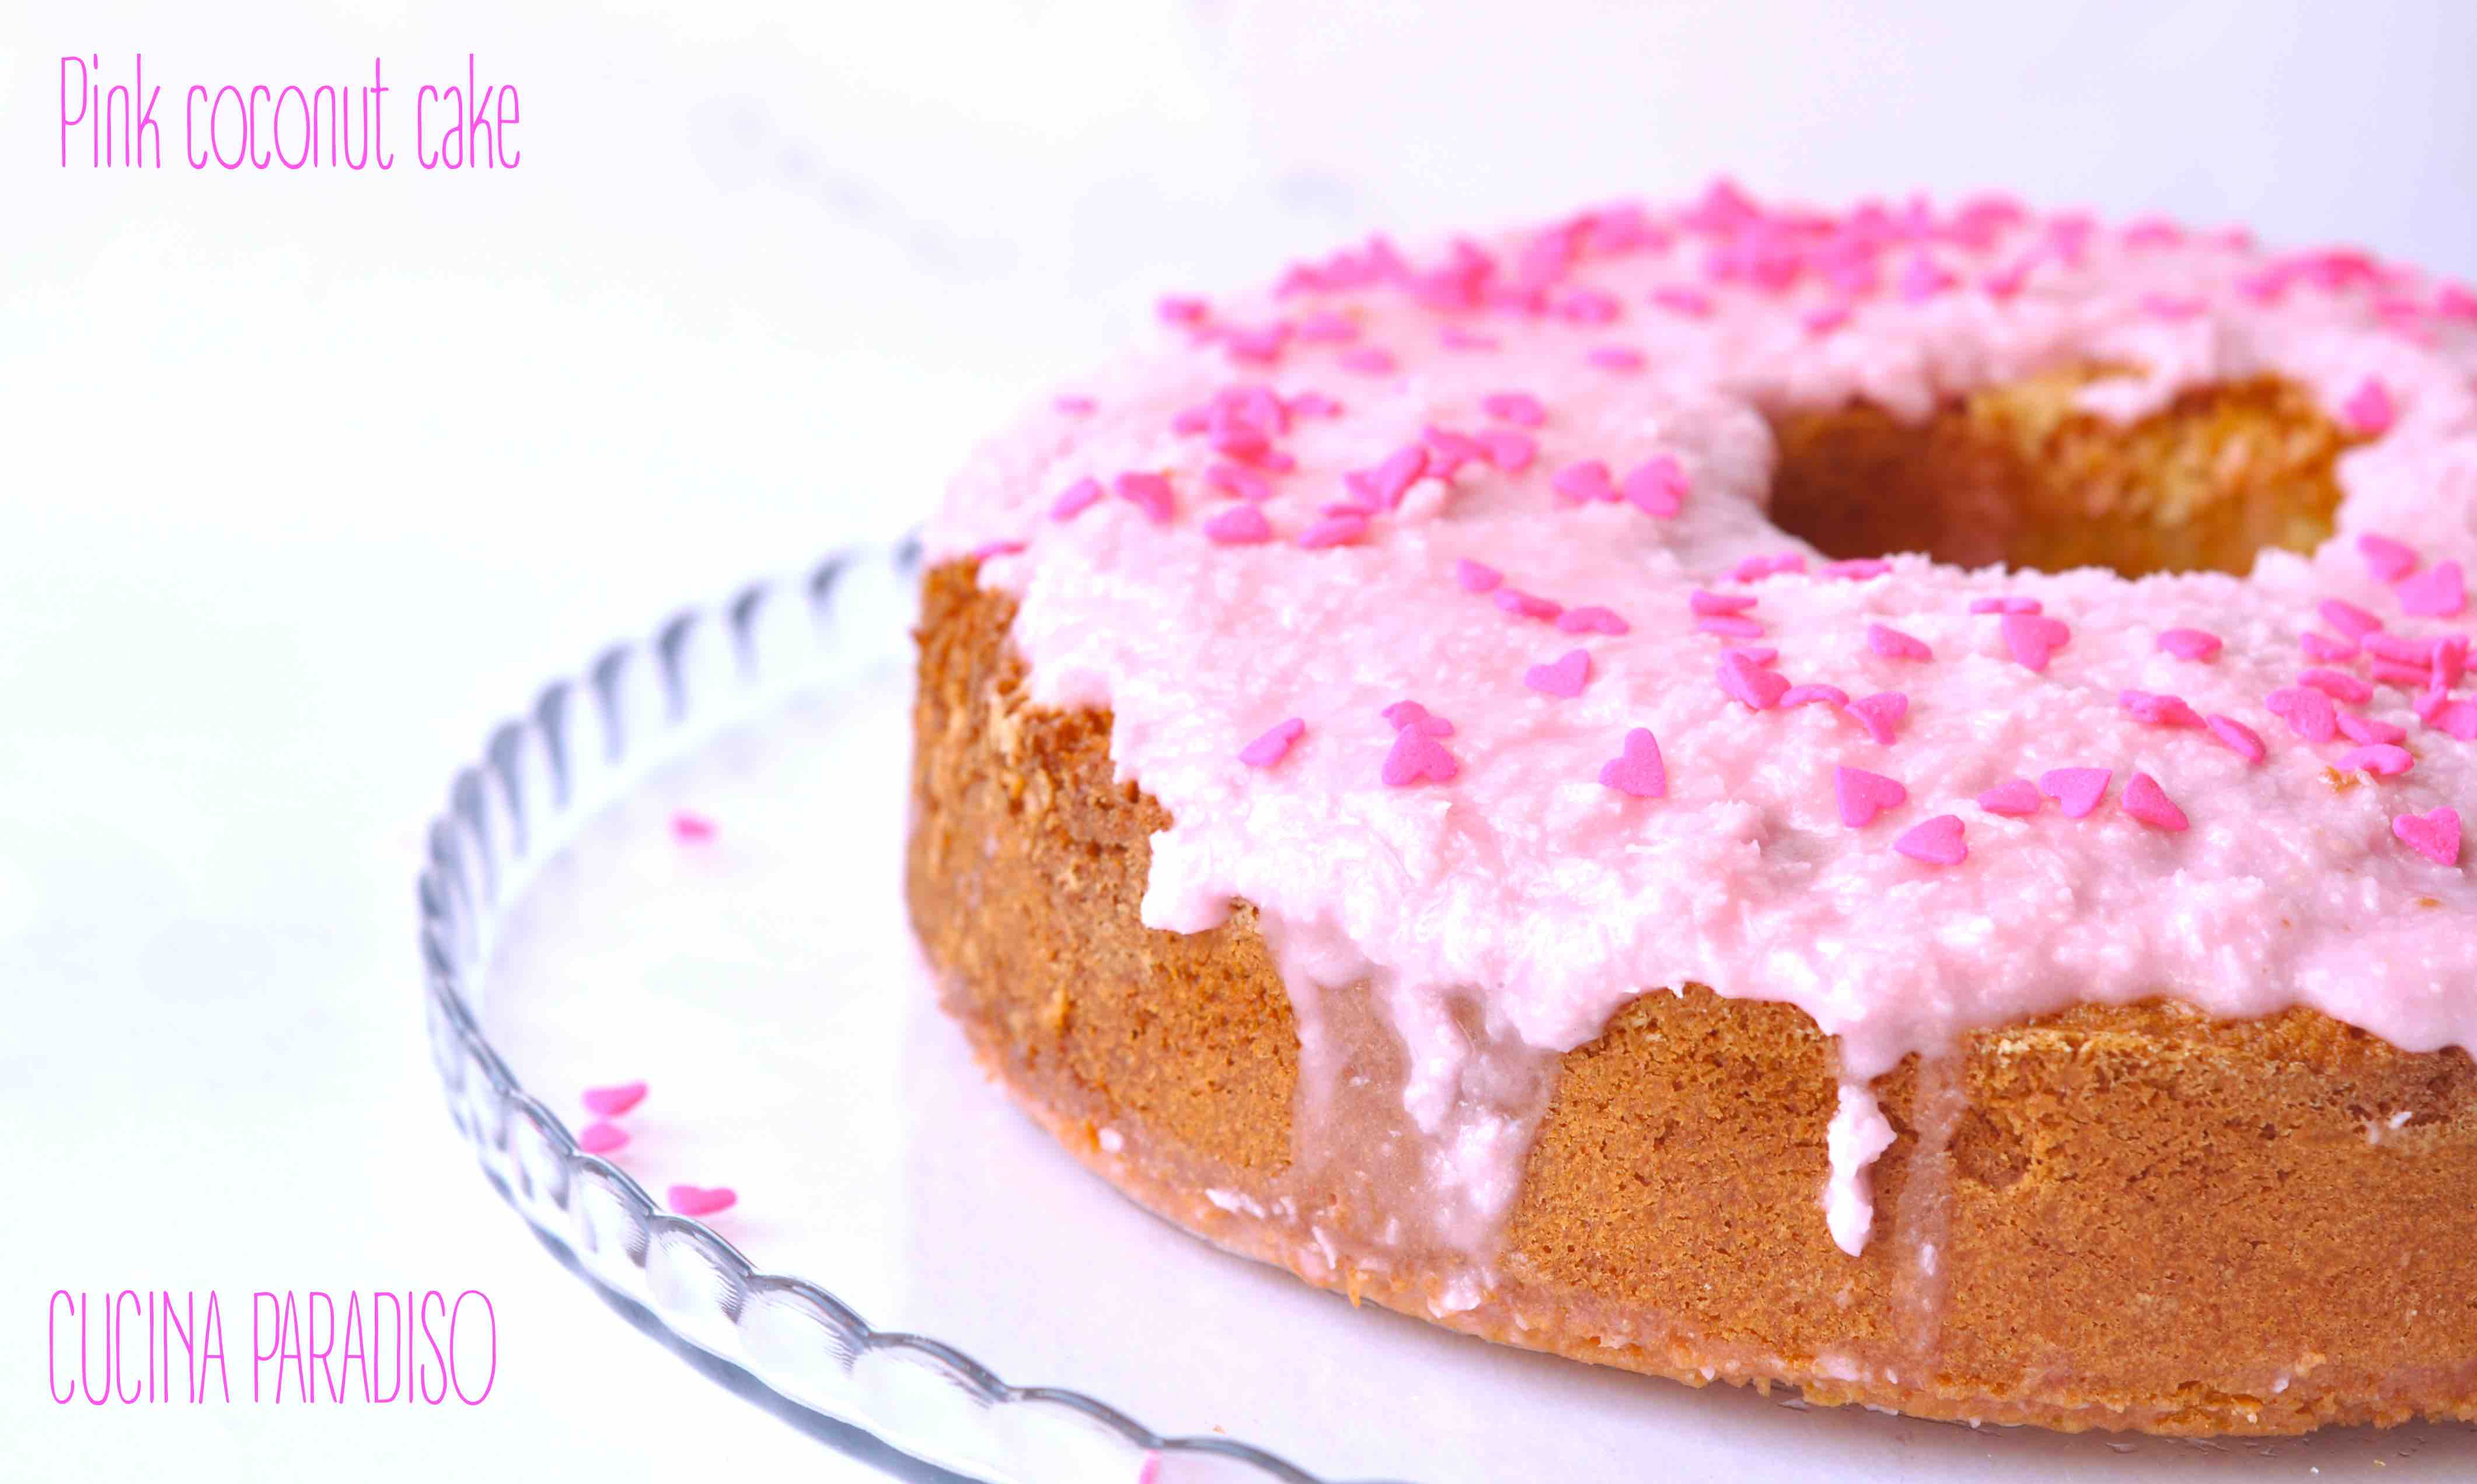 Pink coconut cake